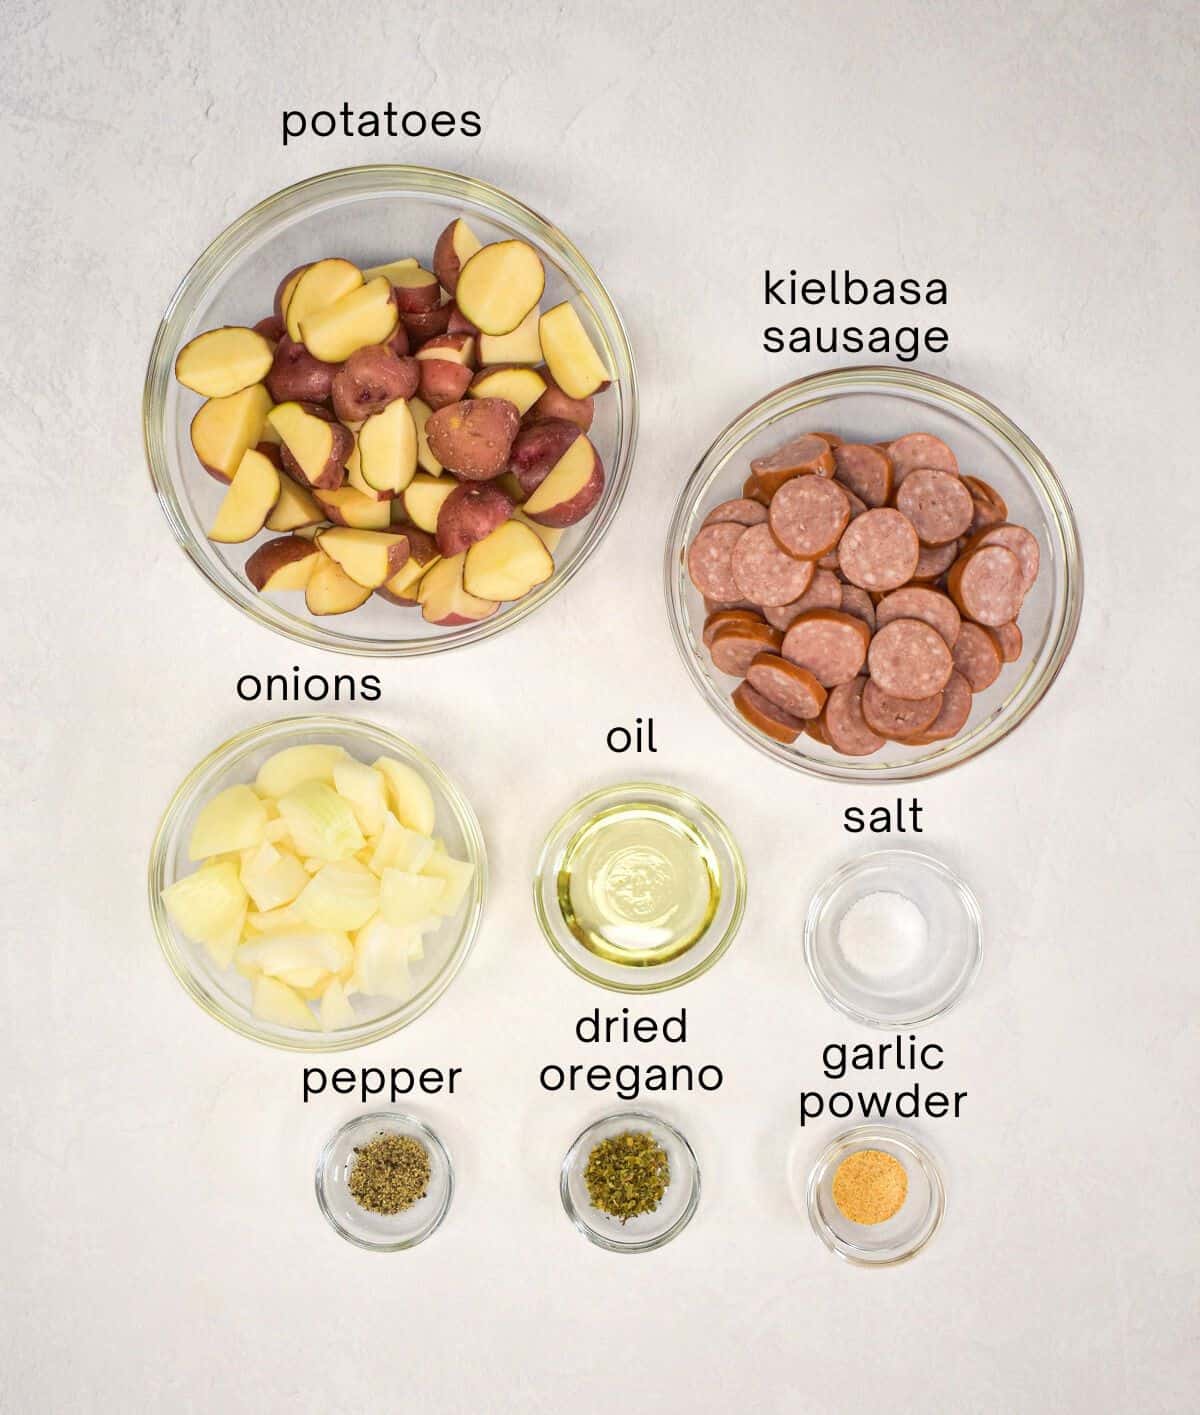 The ingredients for the sheet pan potatoes and sausage prepped and arranged in glass bowls on a table.